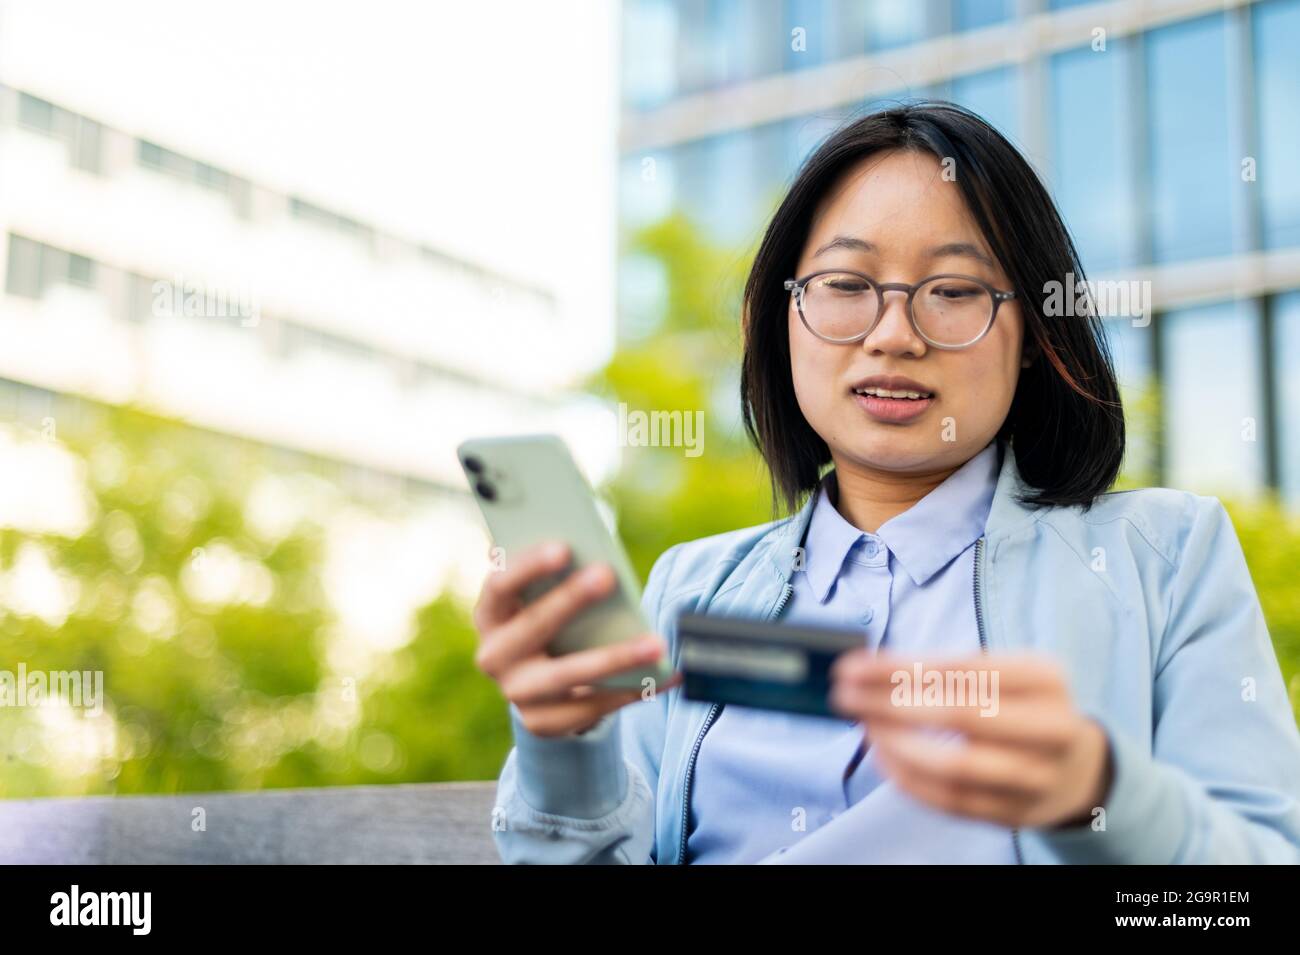 Professional using Fin Tech to make mobile transaction Stock Photo